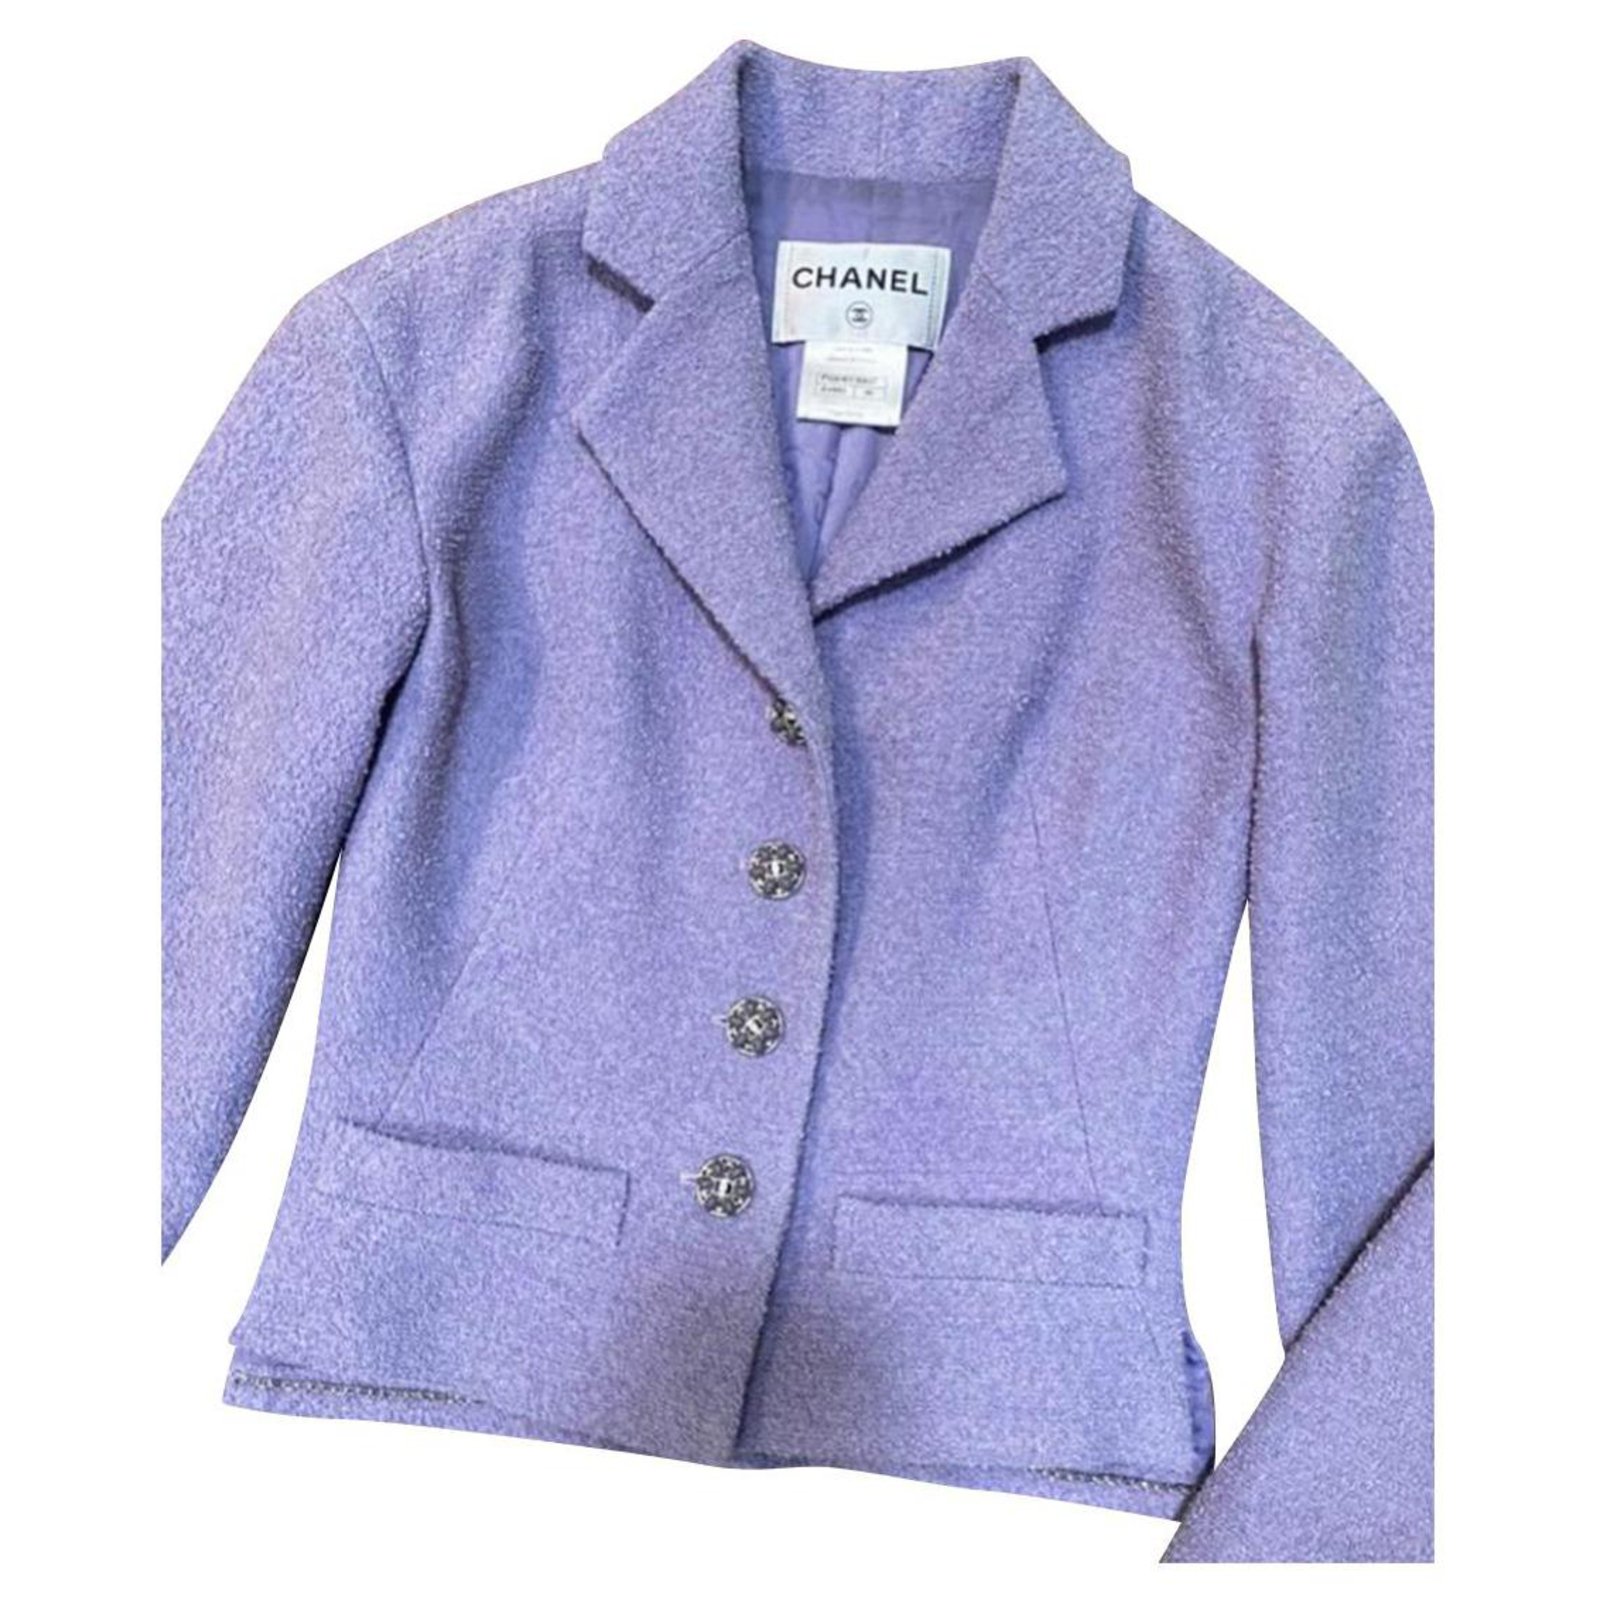 CHANEL  PURPLE SILKBLEND JACKET WITH CAMELLIA BROOCH  Chanel Handbags  and Accessories  2020  Sothebys